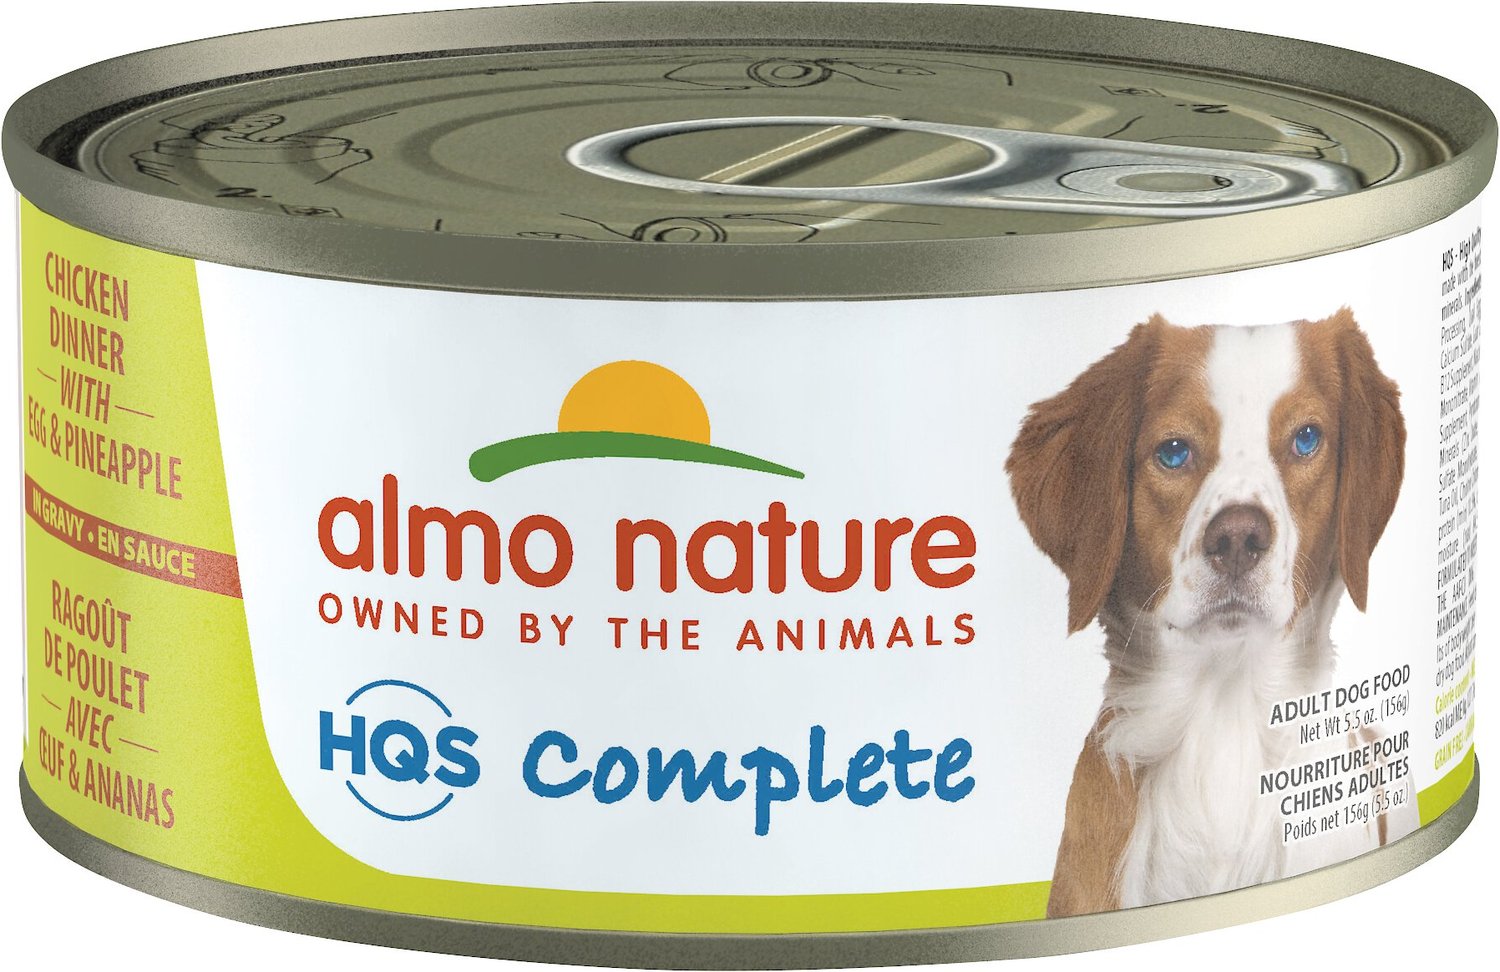 Almo Nature HQS Complete Chicken Dinner with Pineapple & Egg Canned Dog Food, 5.5-oz can, case of 24